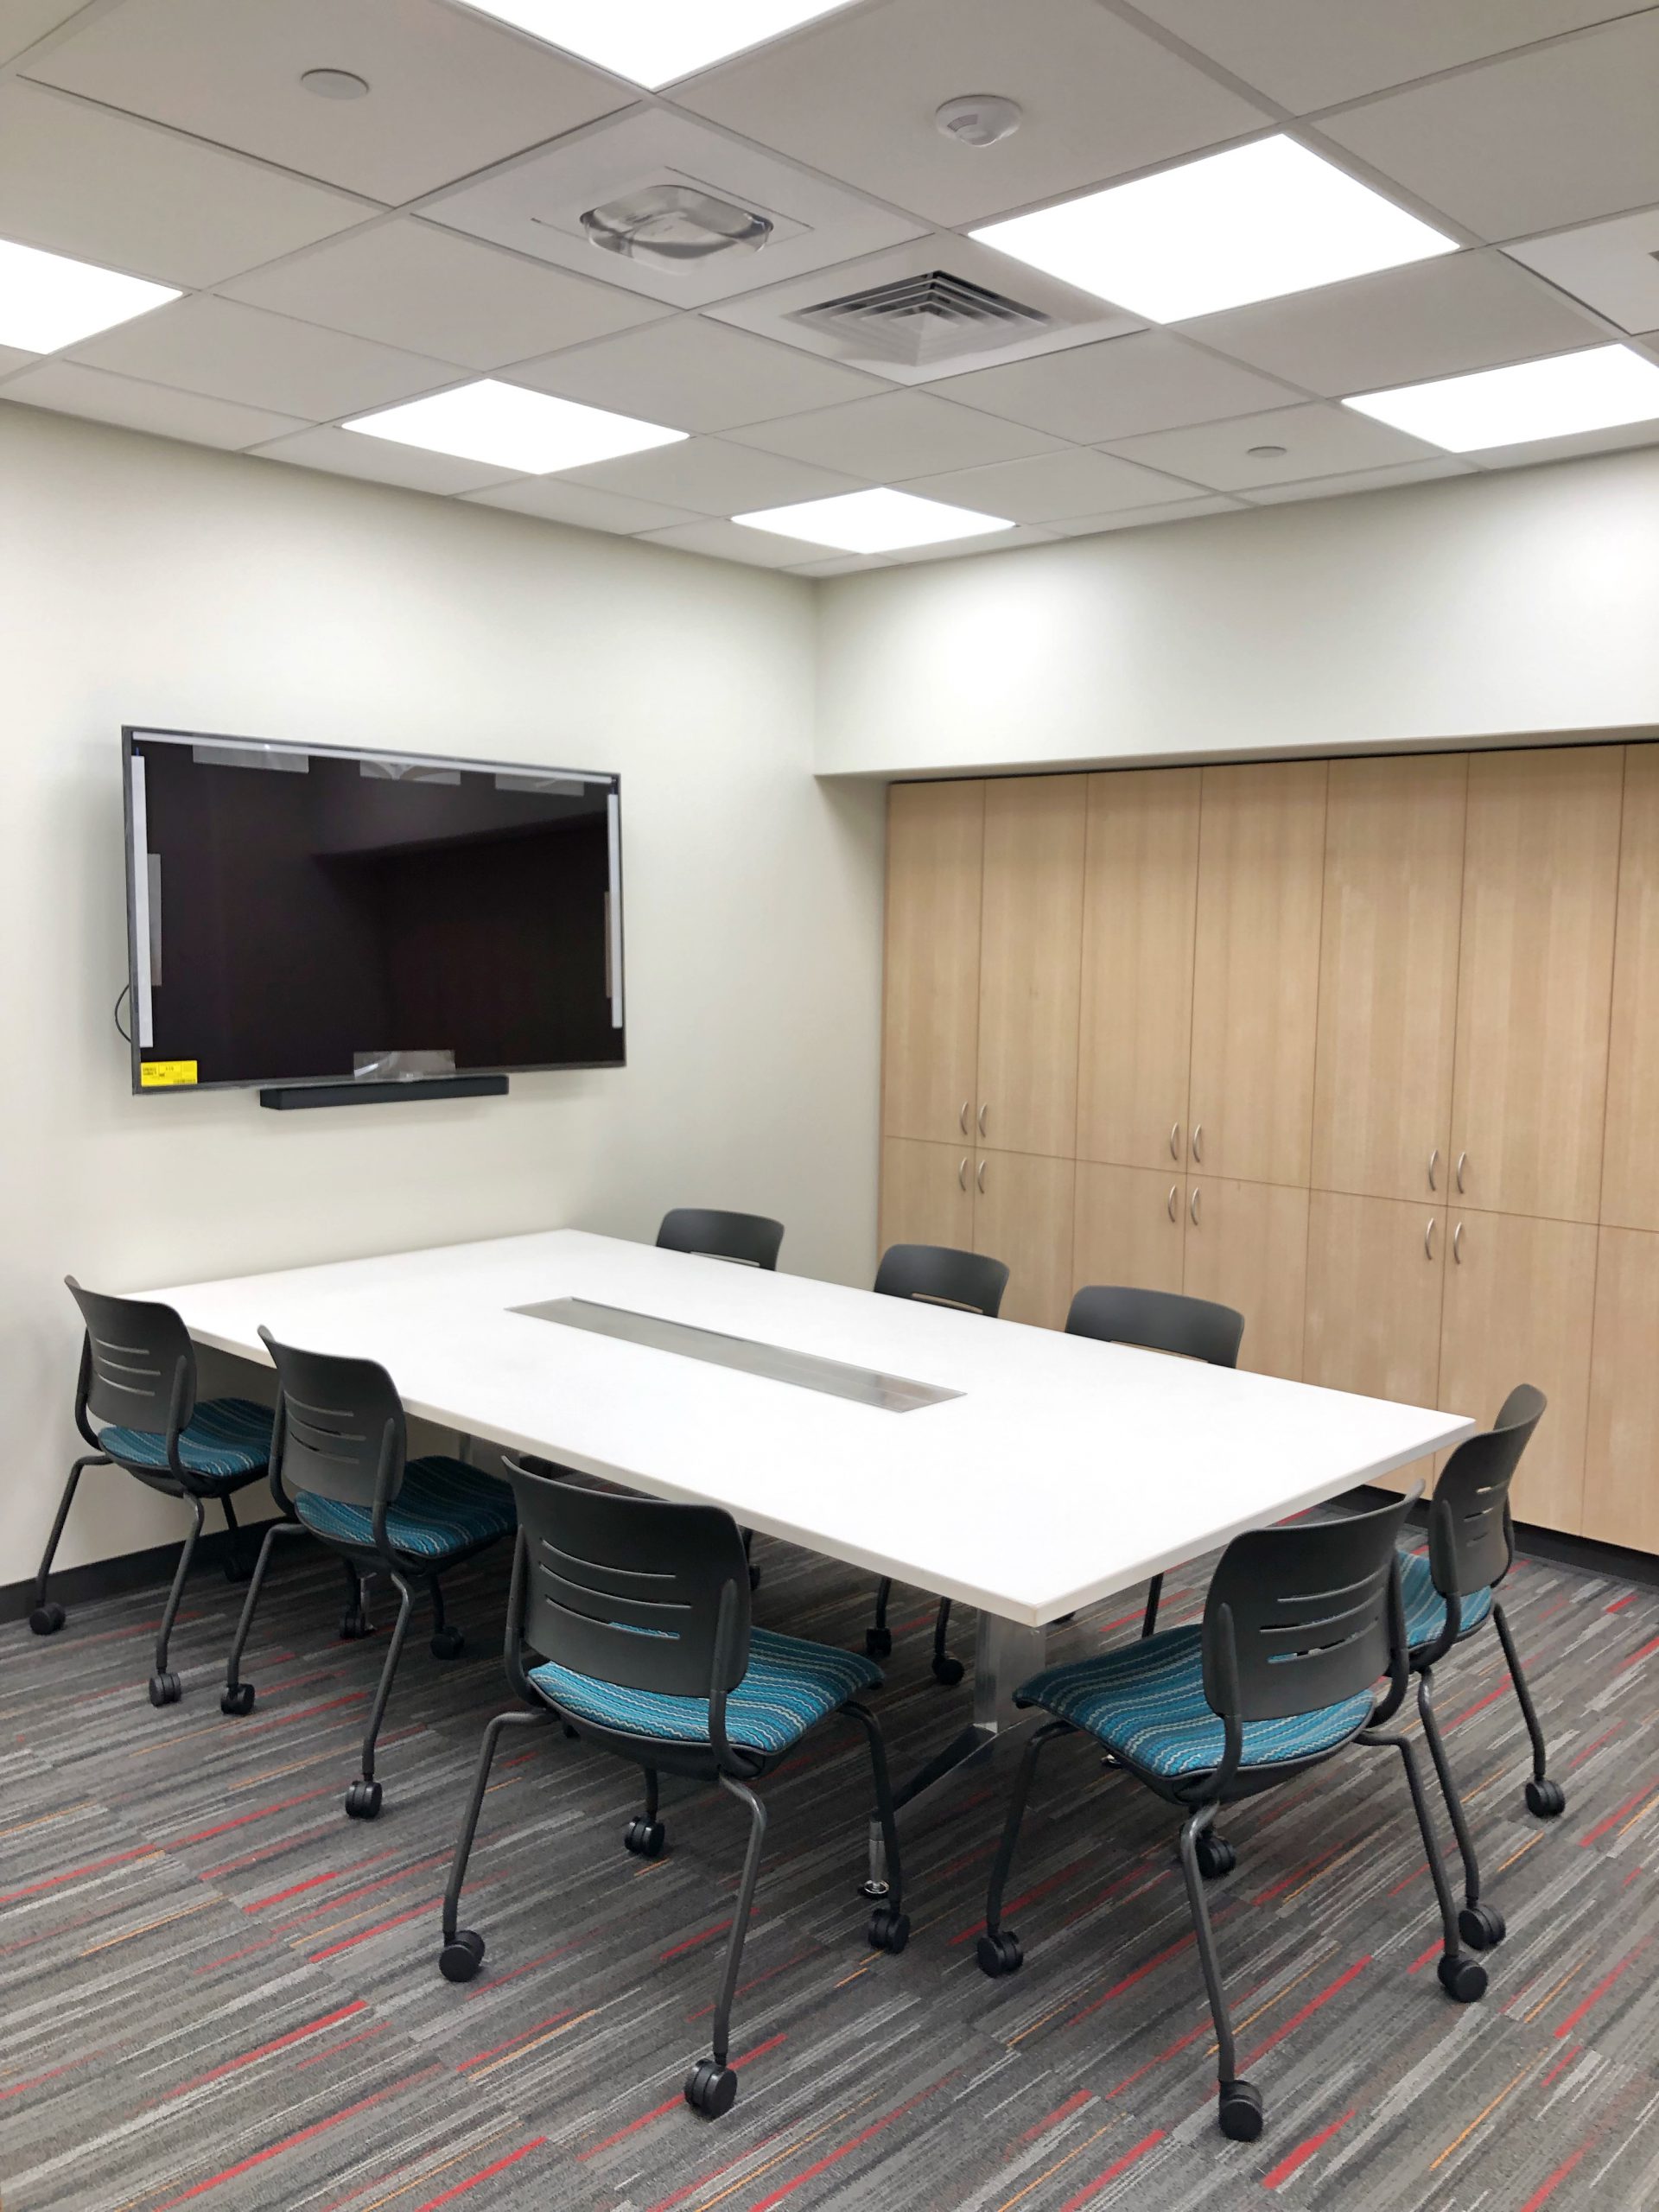 A room with a conference table, chairs, and a wall-mounted screen.